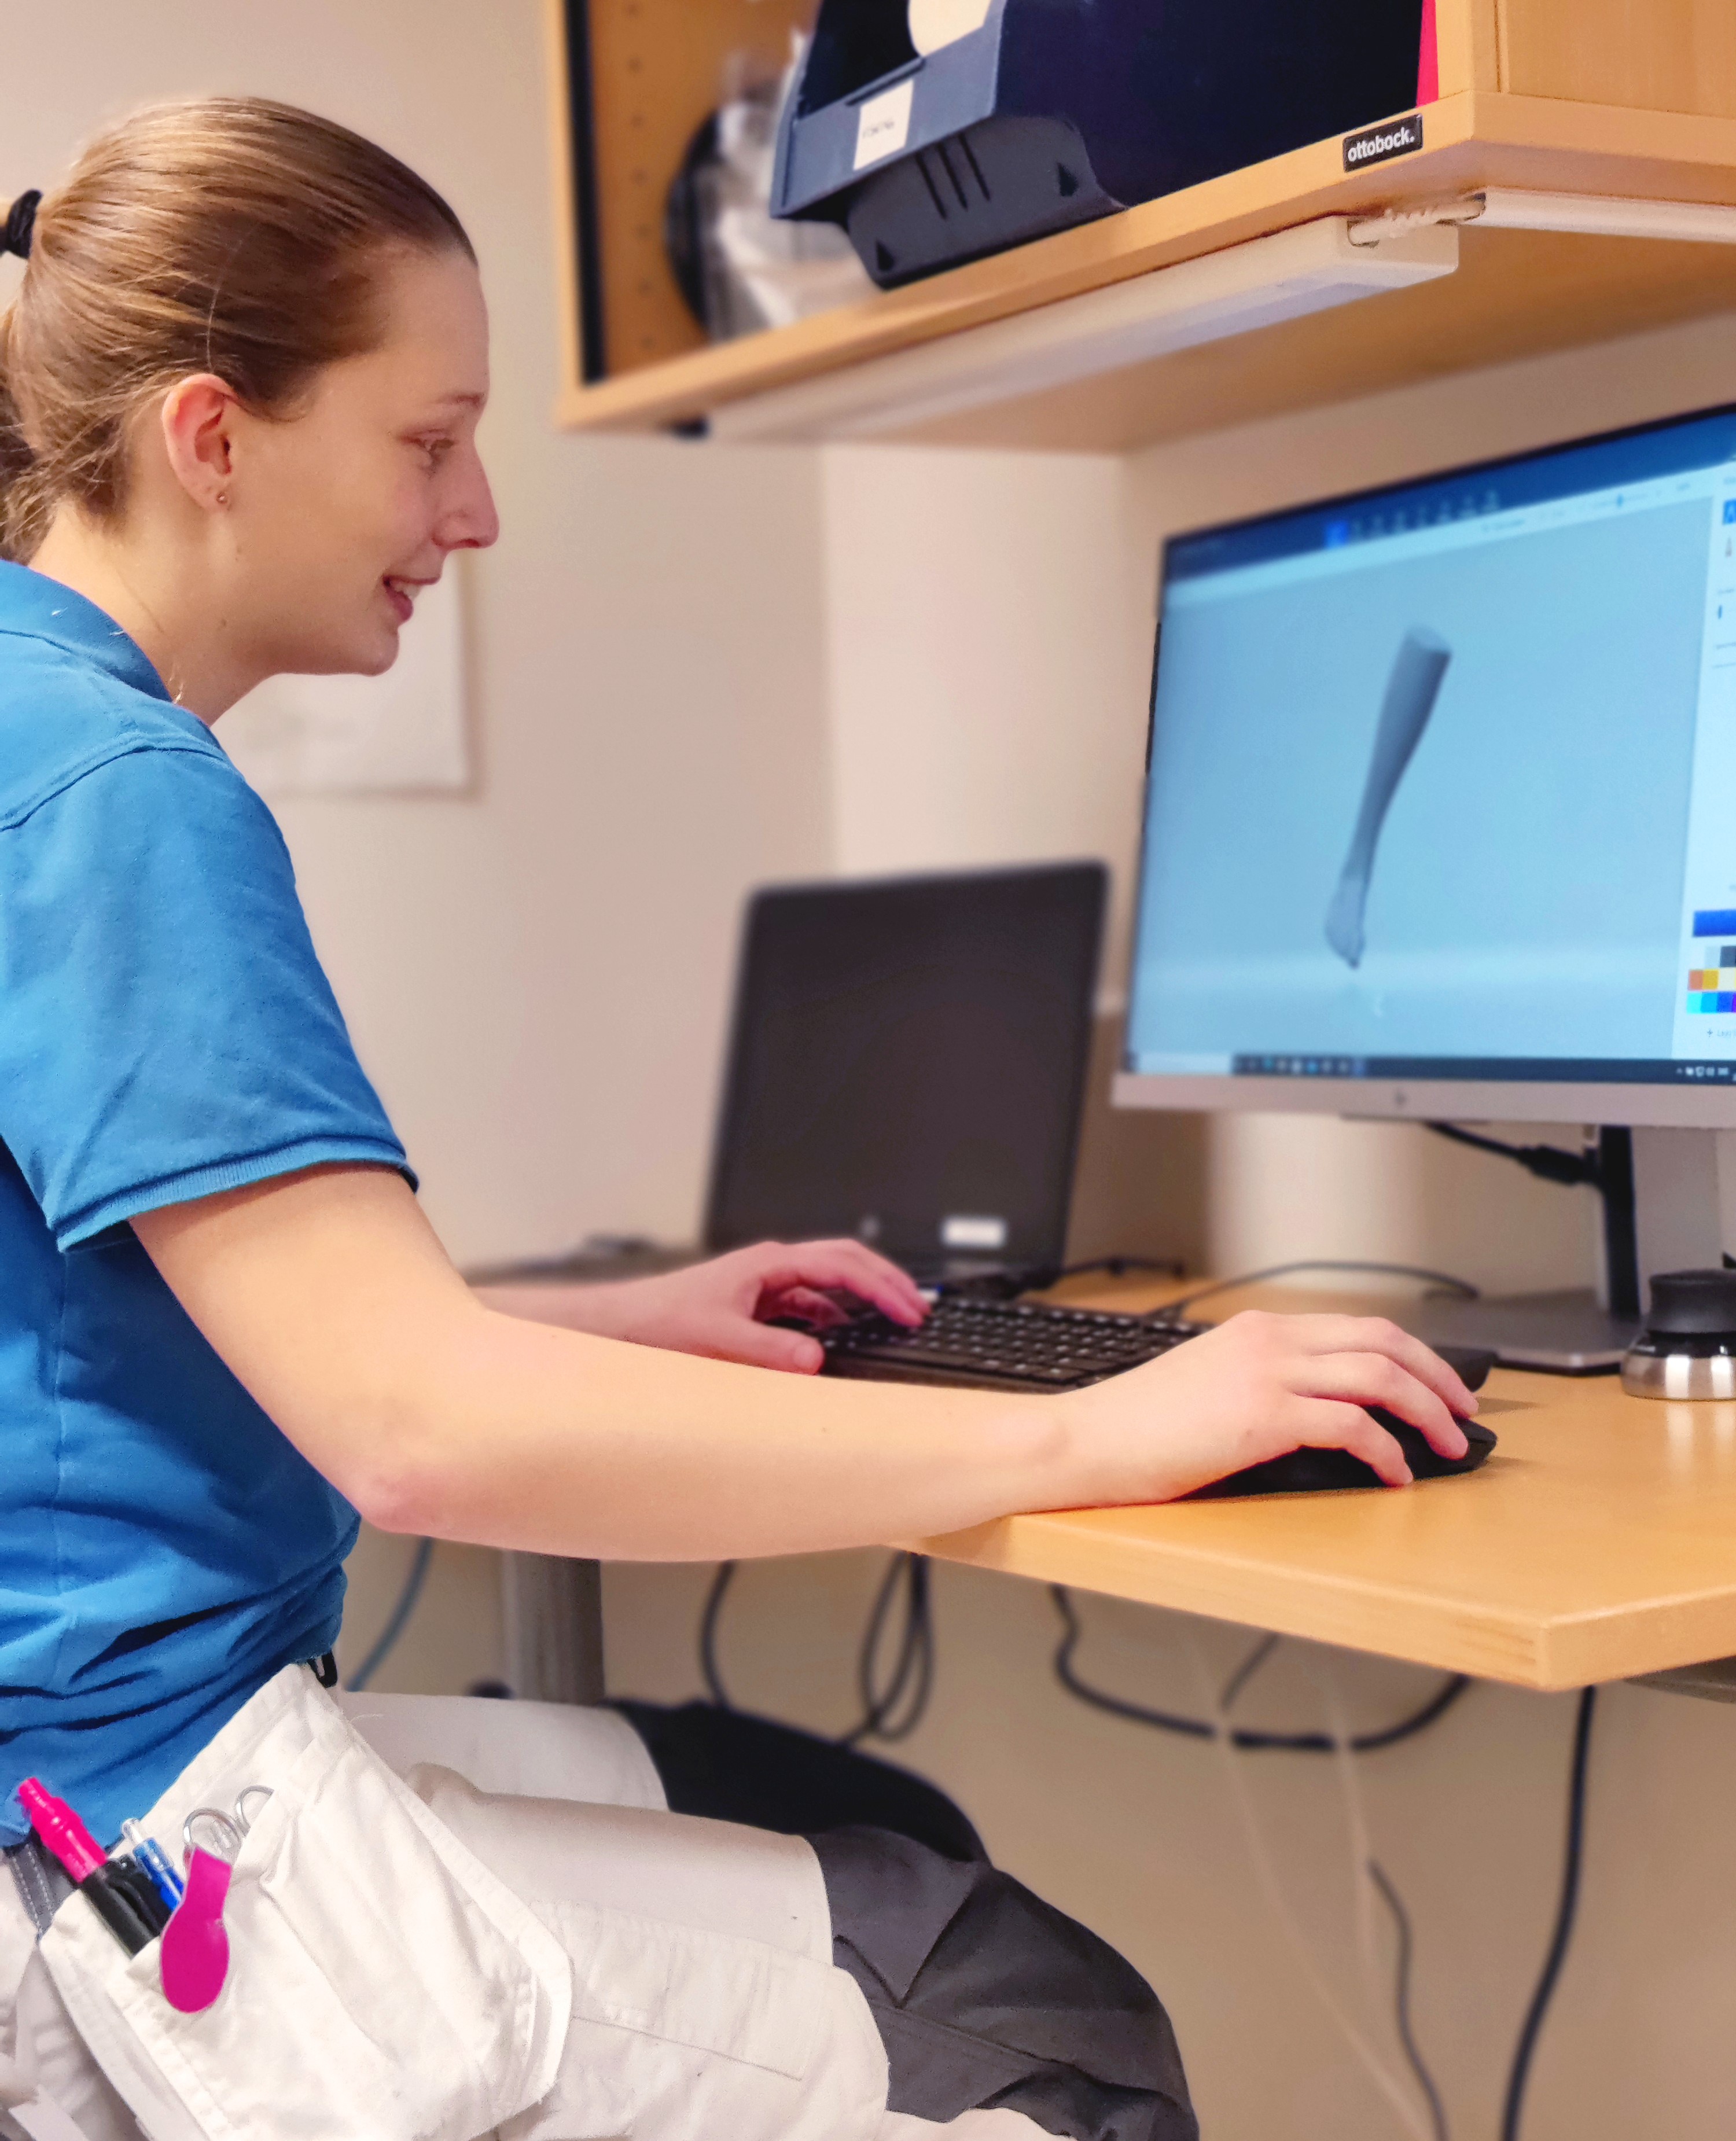 Woman in front of computer where the display is showing a foot prothesis